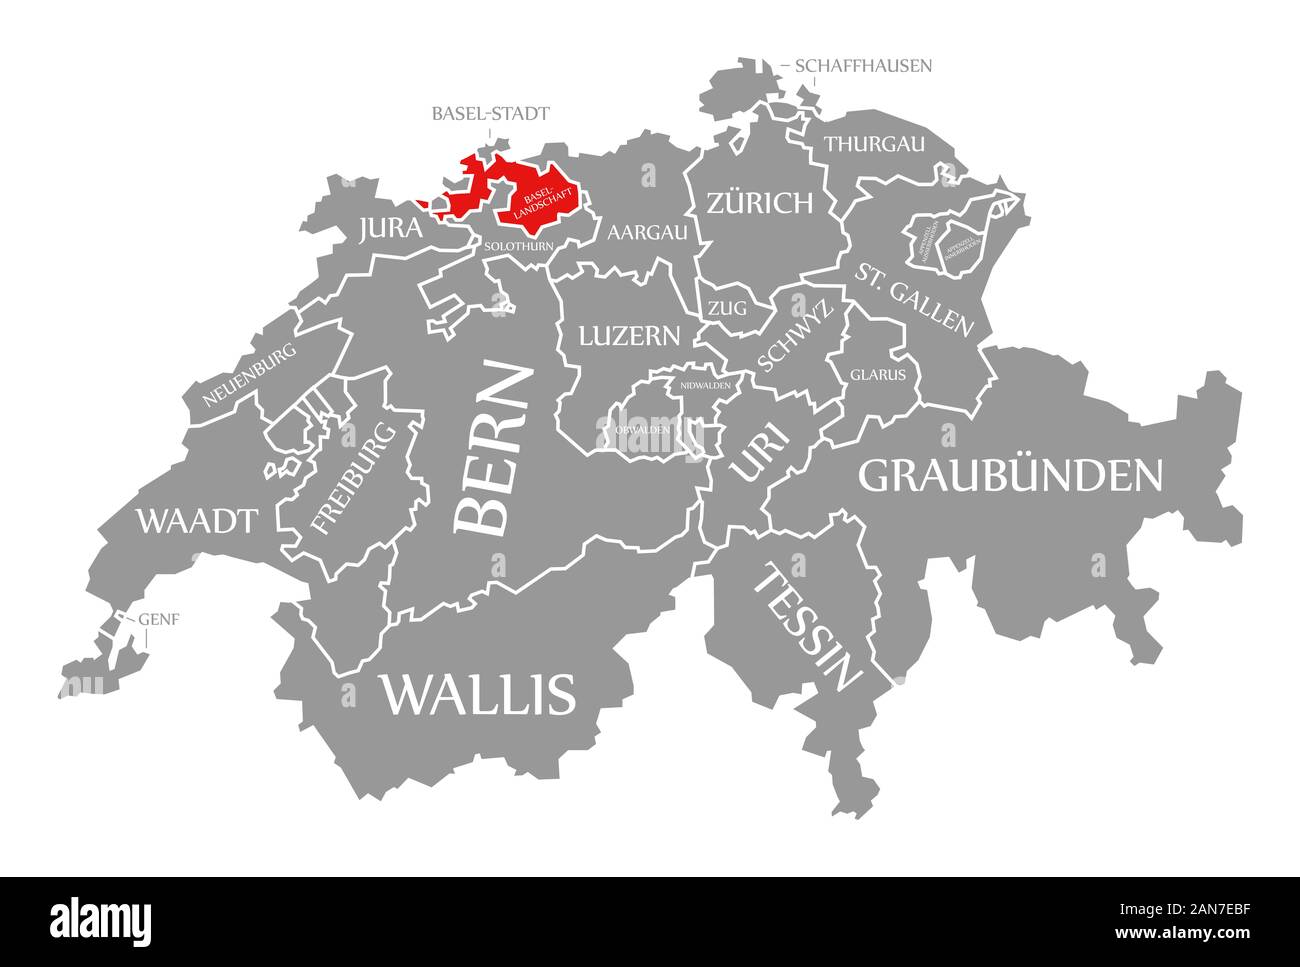 Basel Landschaft red highlighted in map of Switzerland Stock Photo